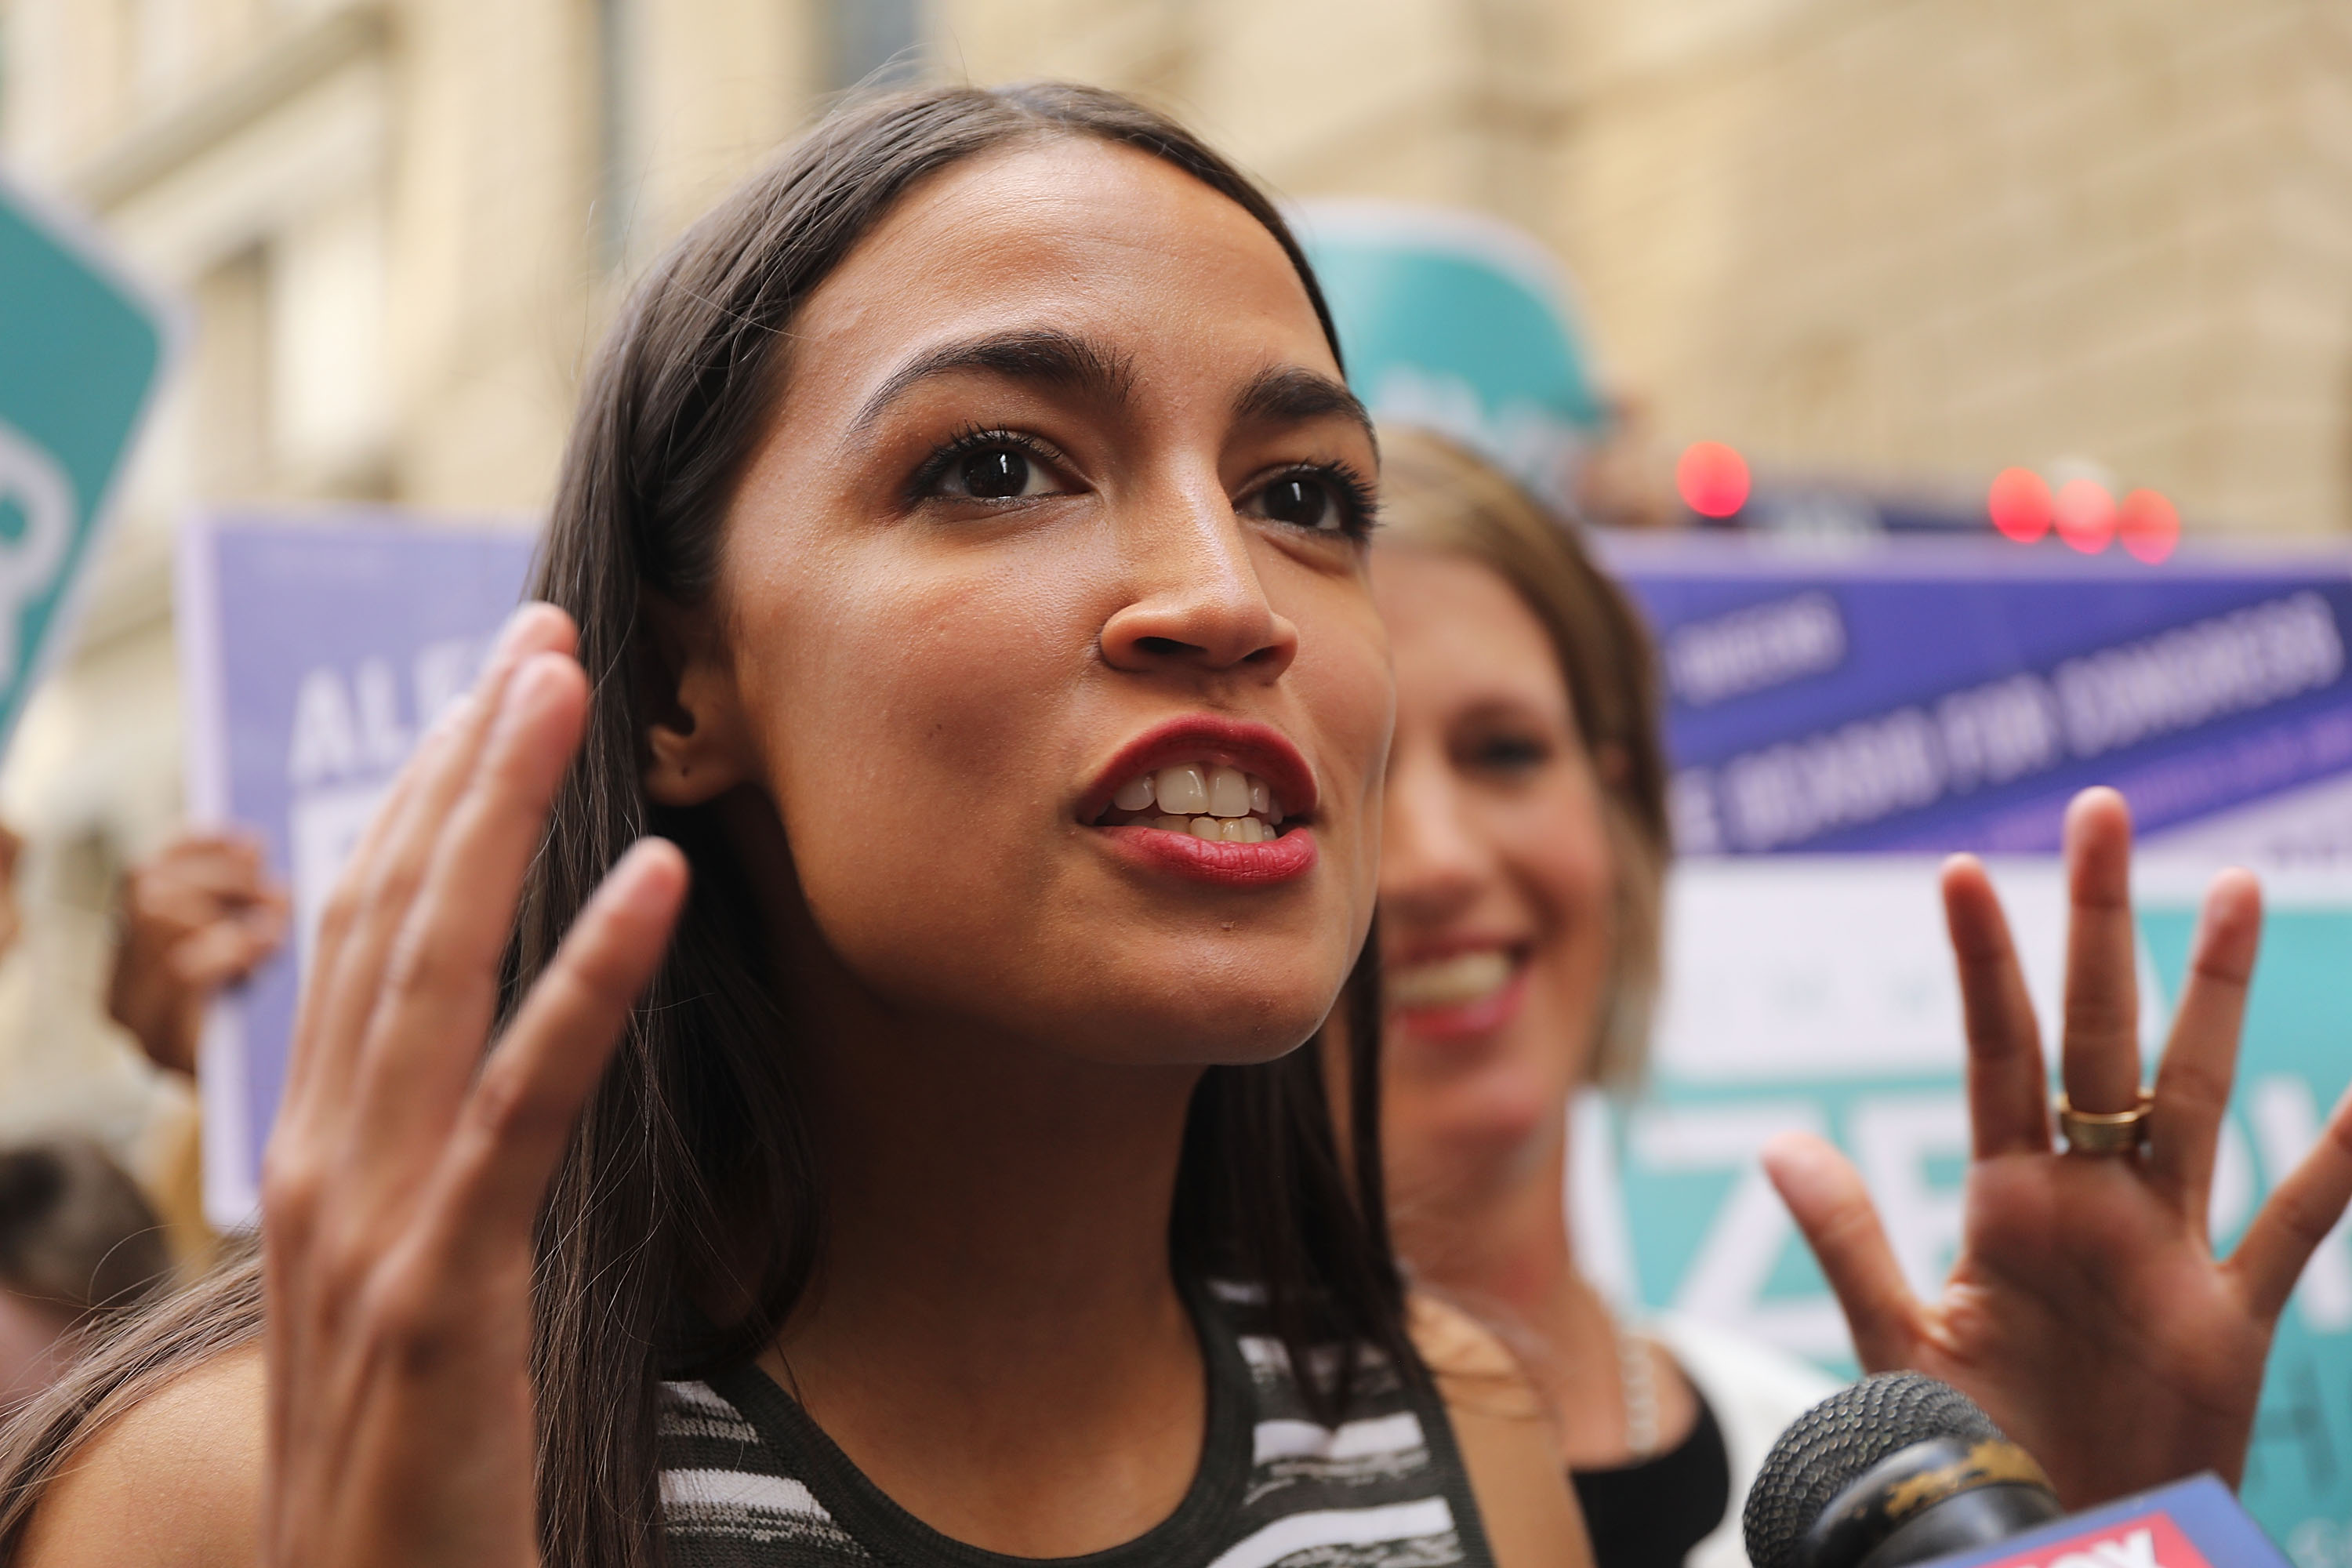 Alexandria Ocasio-Cortez marches in New York as a Democratic socialist and rising liberal star